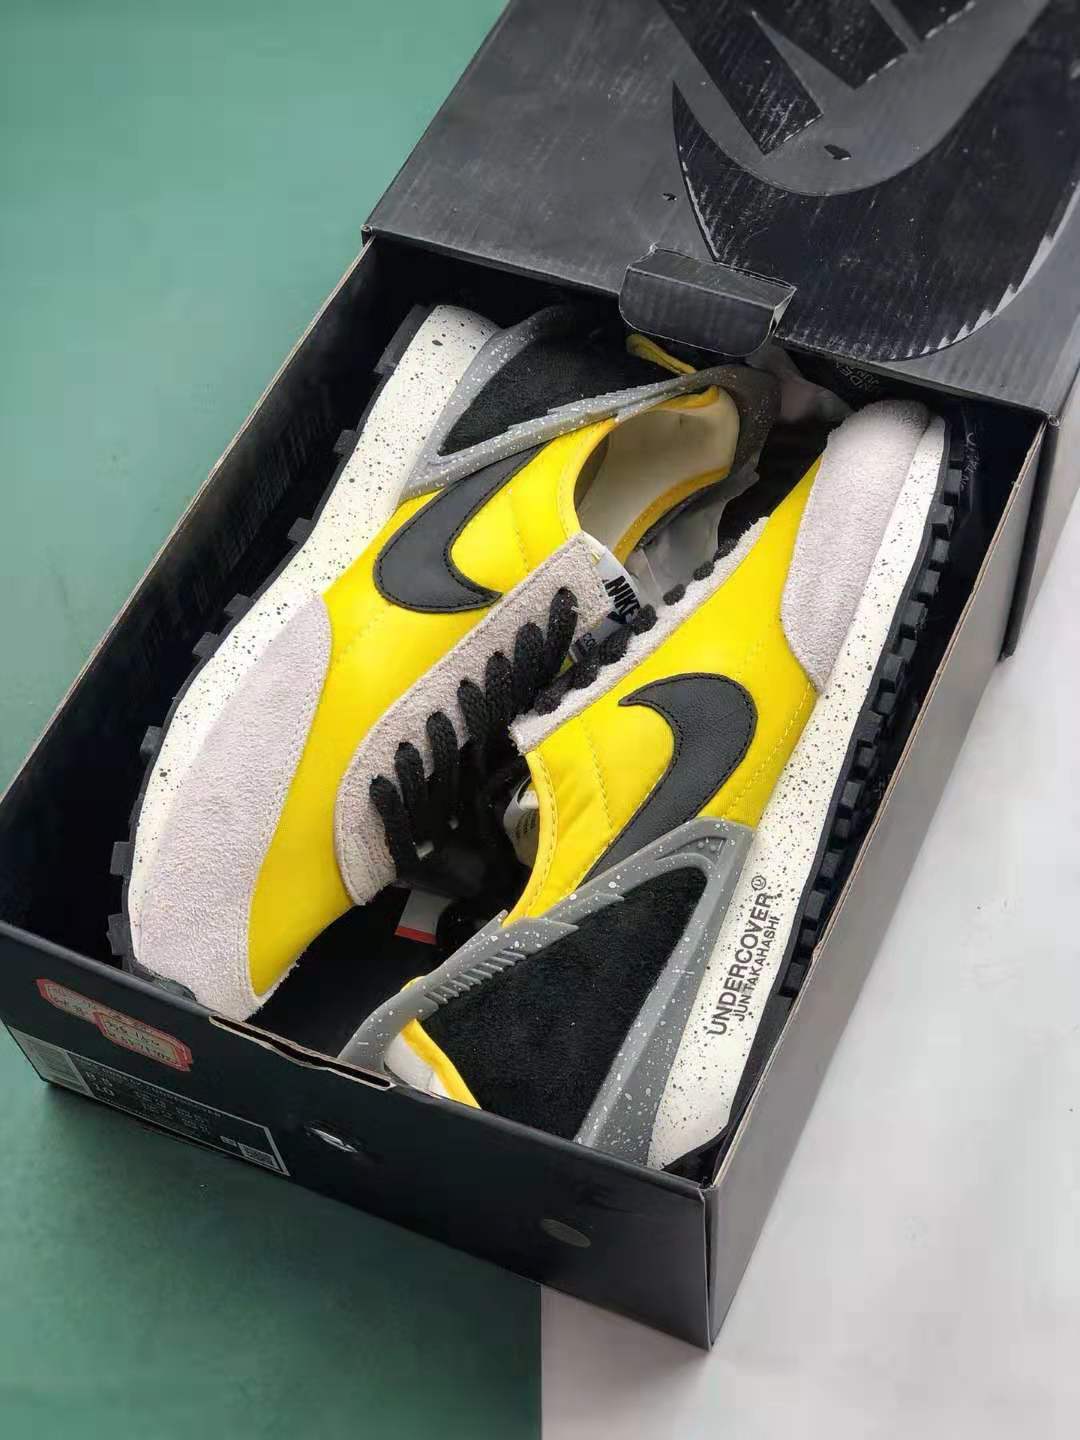 Nike Undercover x Daybreak 'Bright Citron' BV4594-700 - Shop Now For Exclusive Sneaker Collaboration